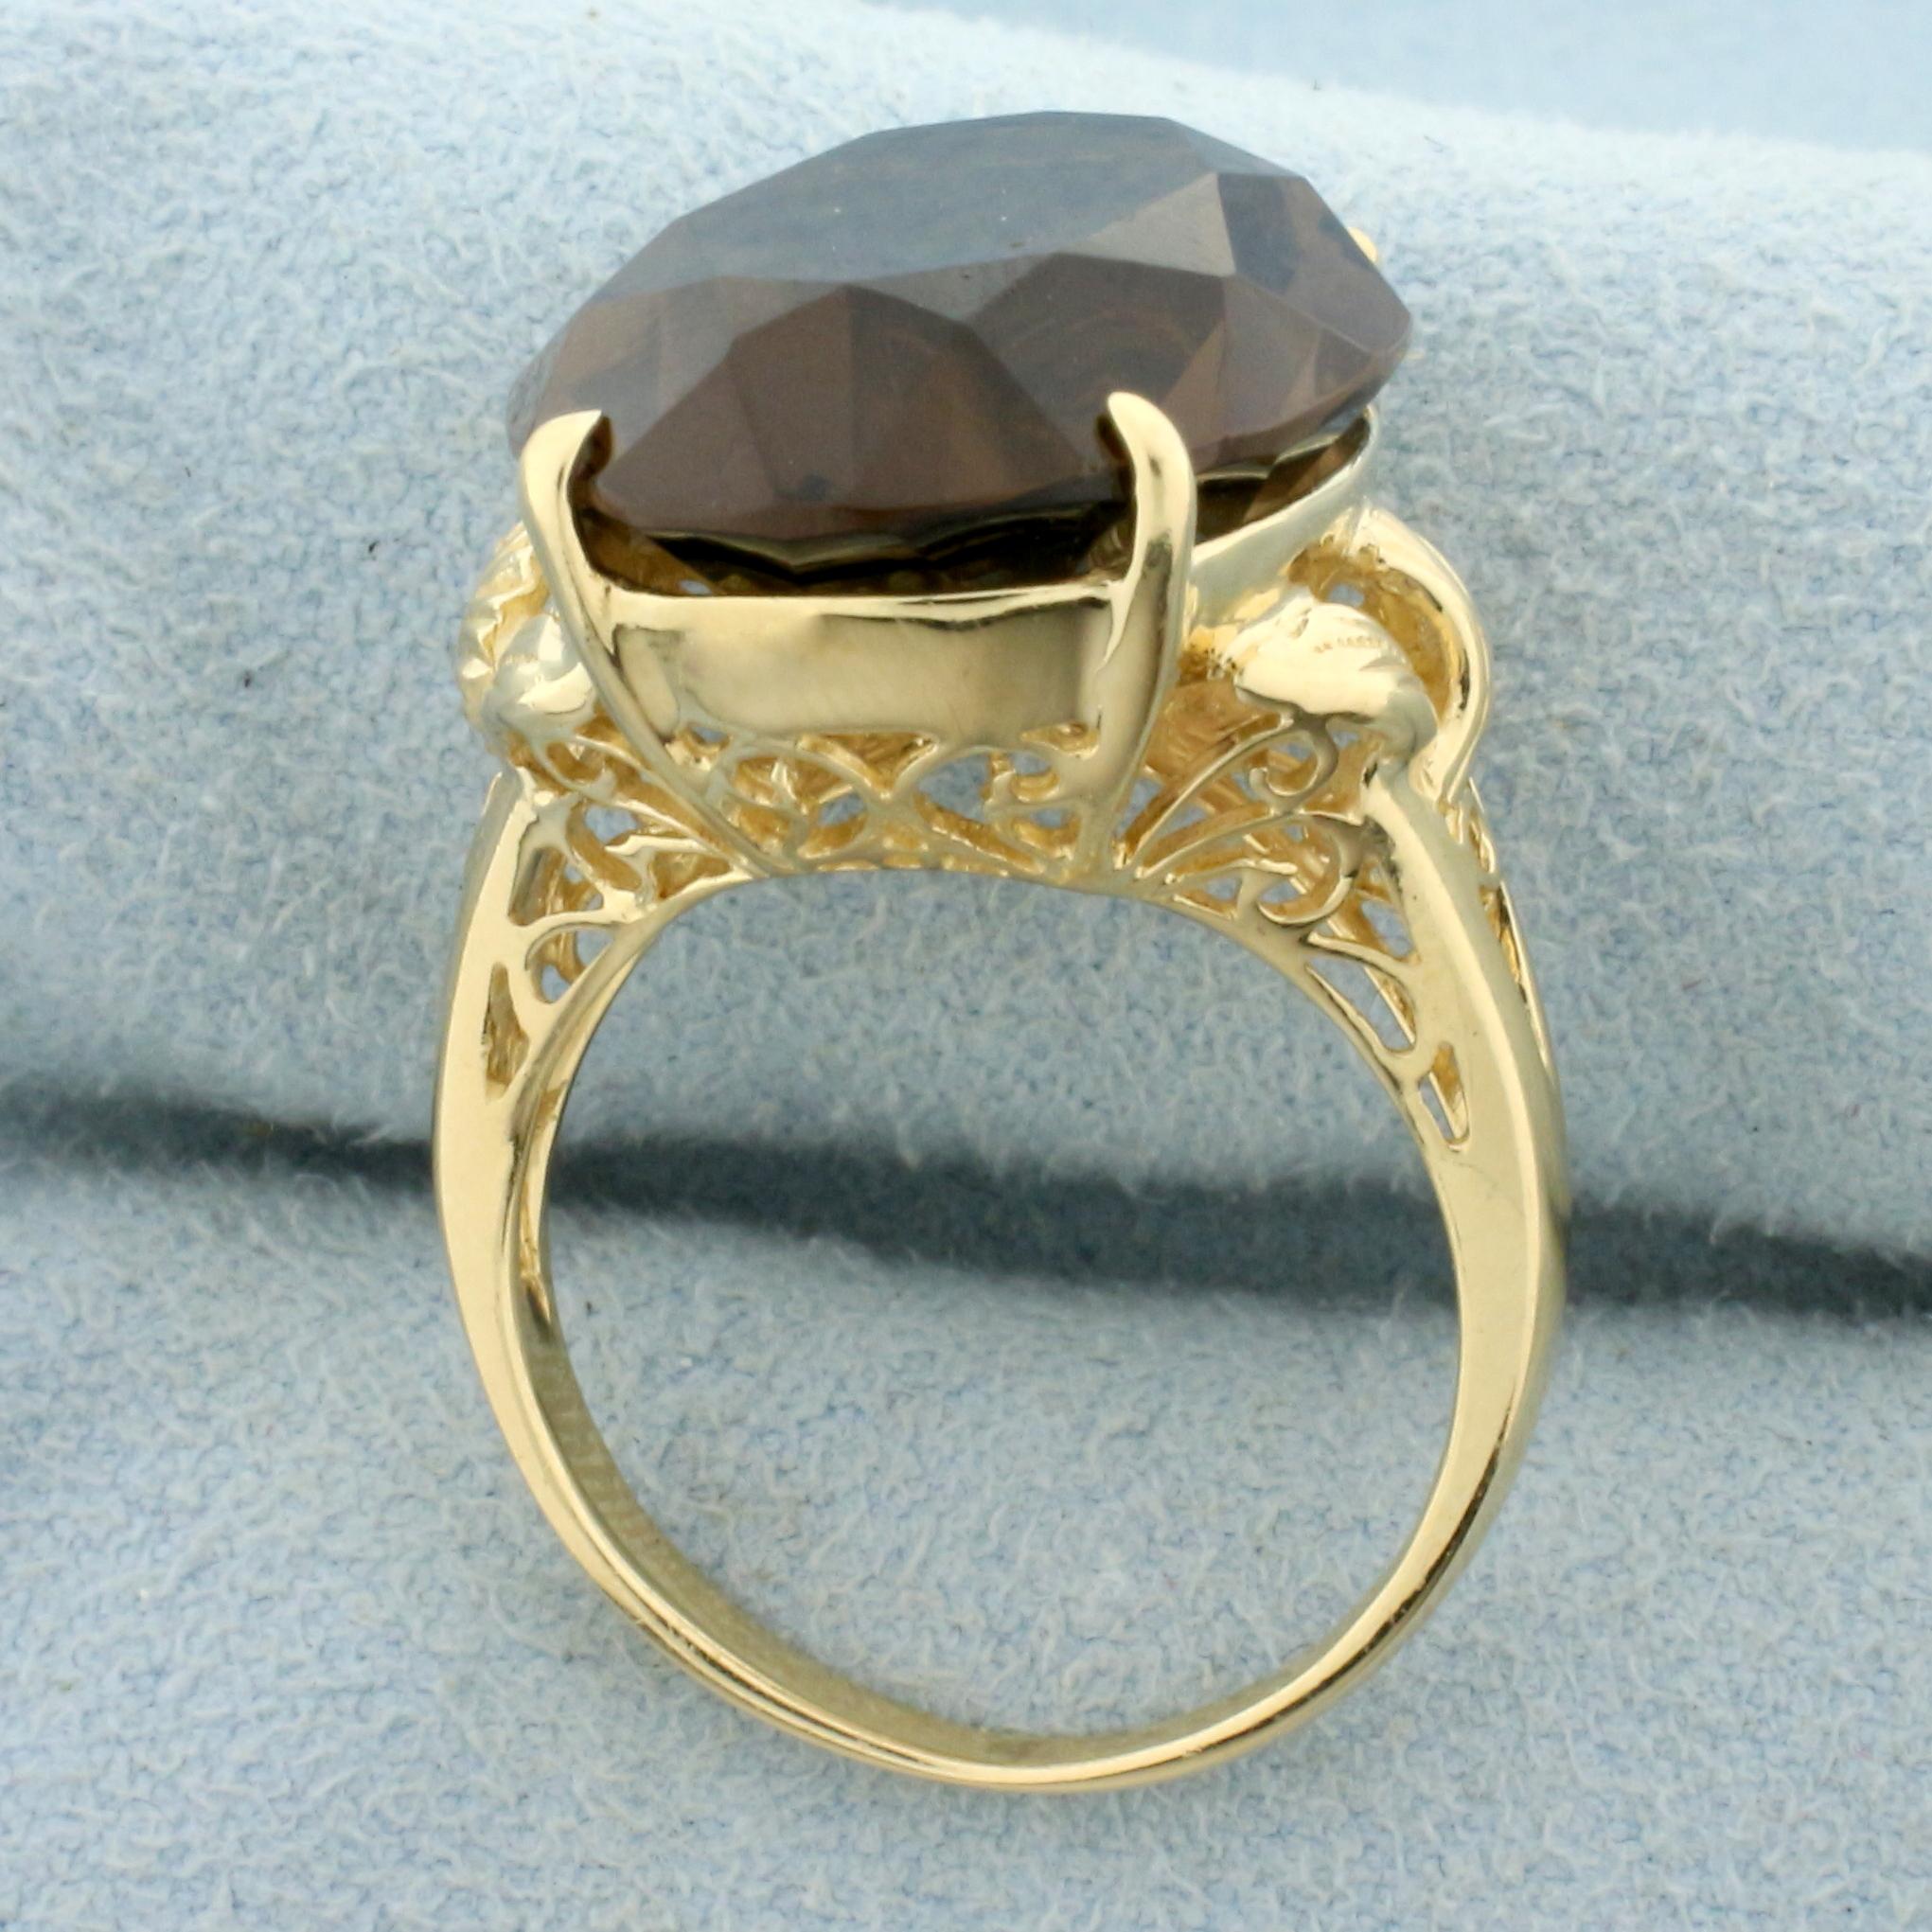 24ct Smoky Topaz Statement Ring In 14k Yellow Gold